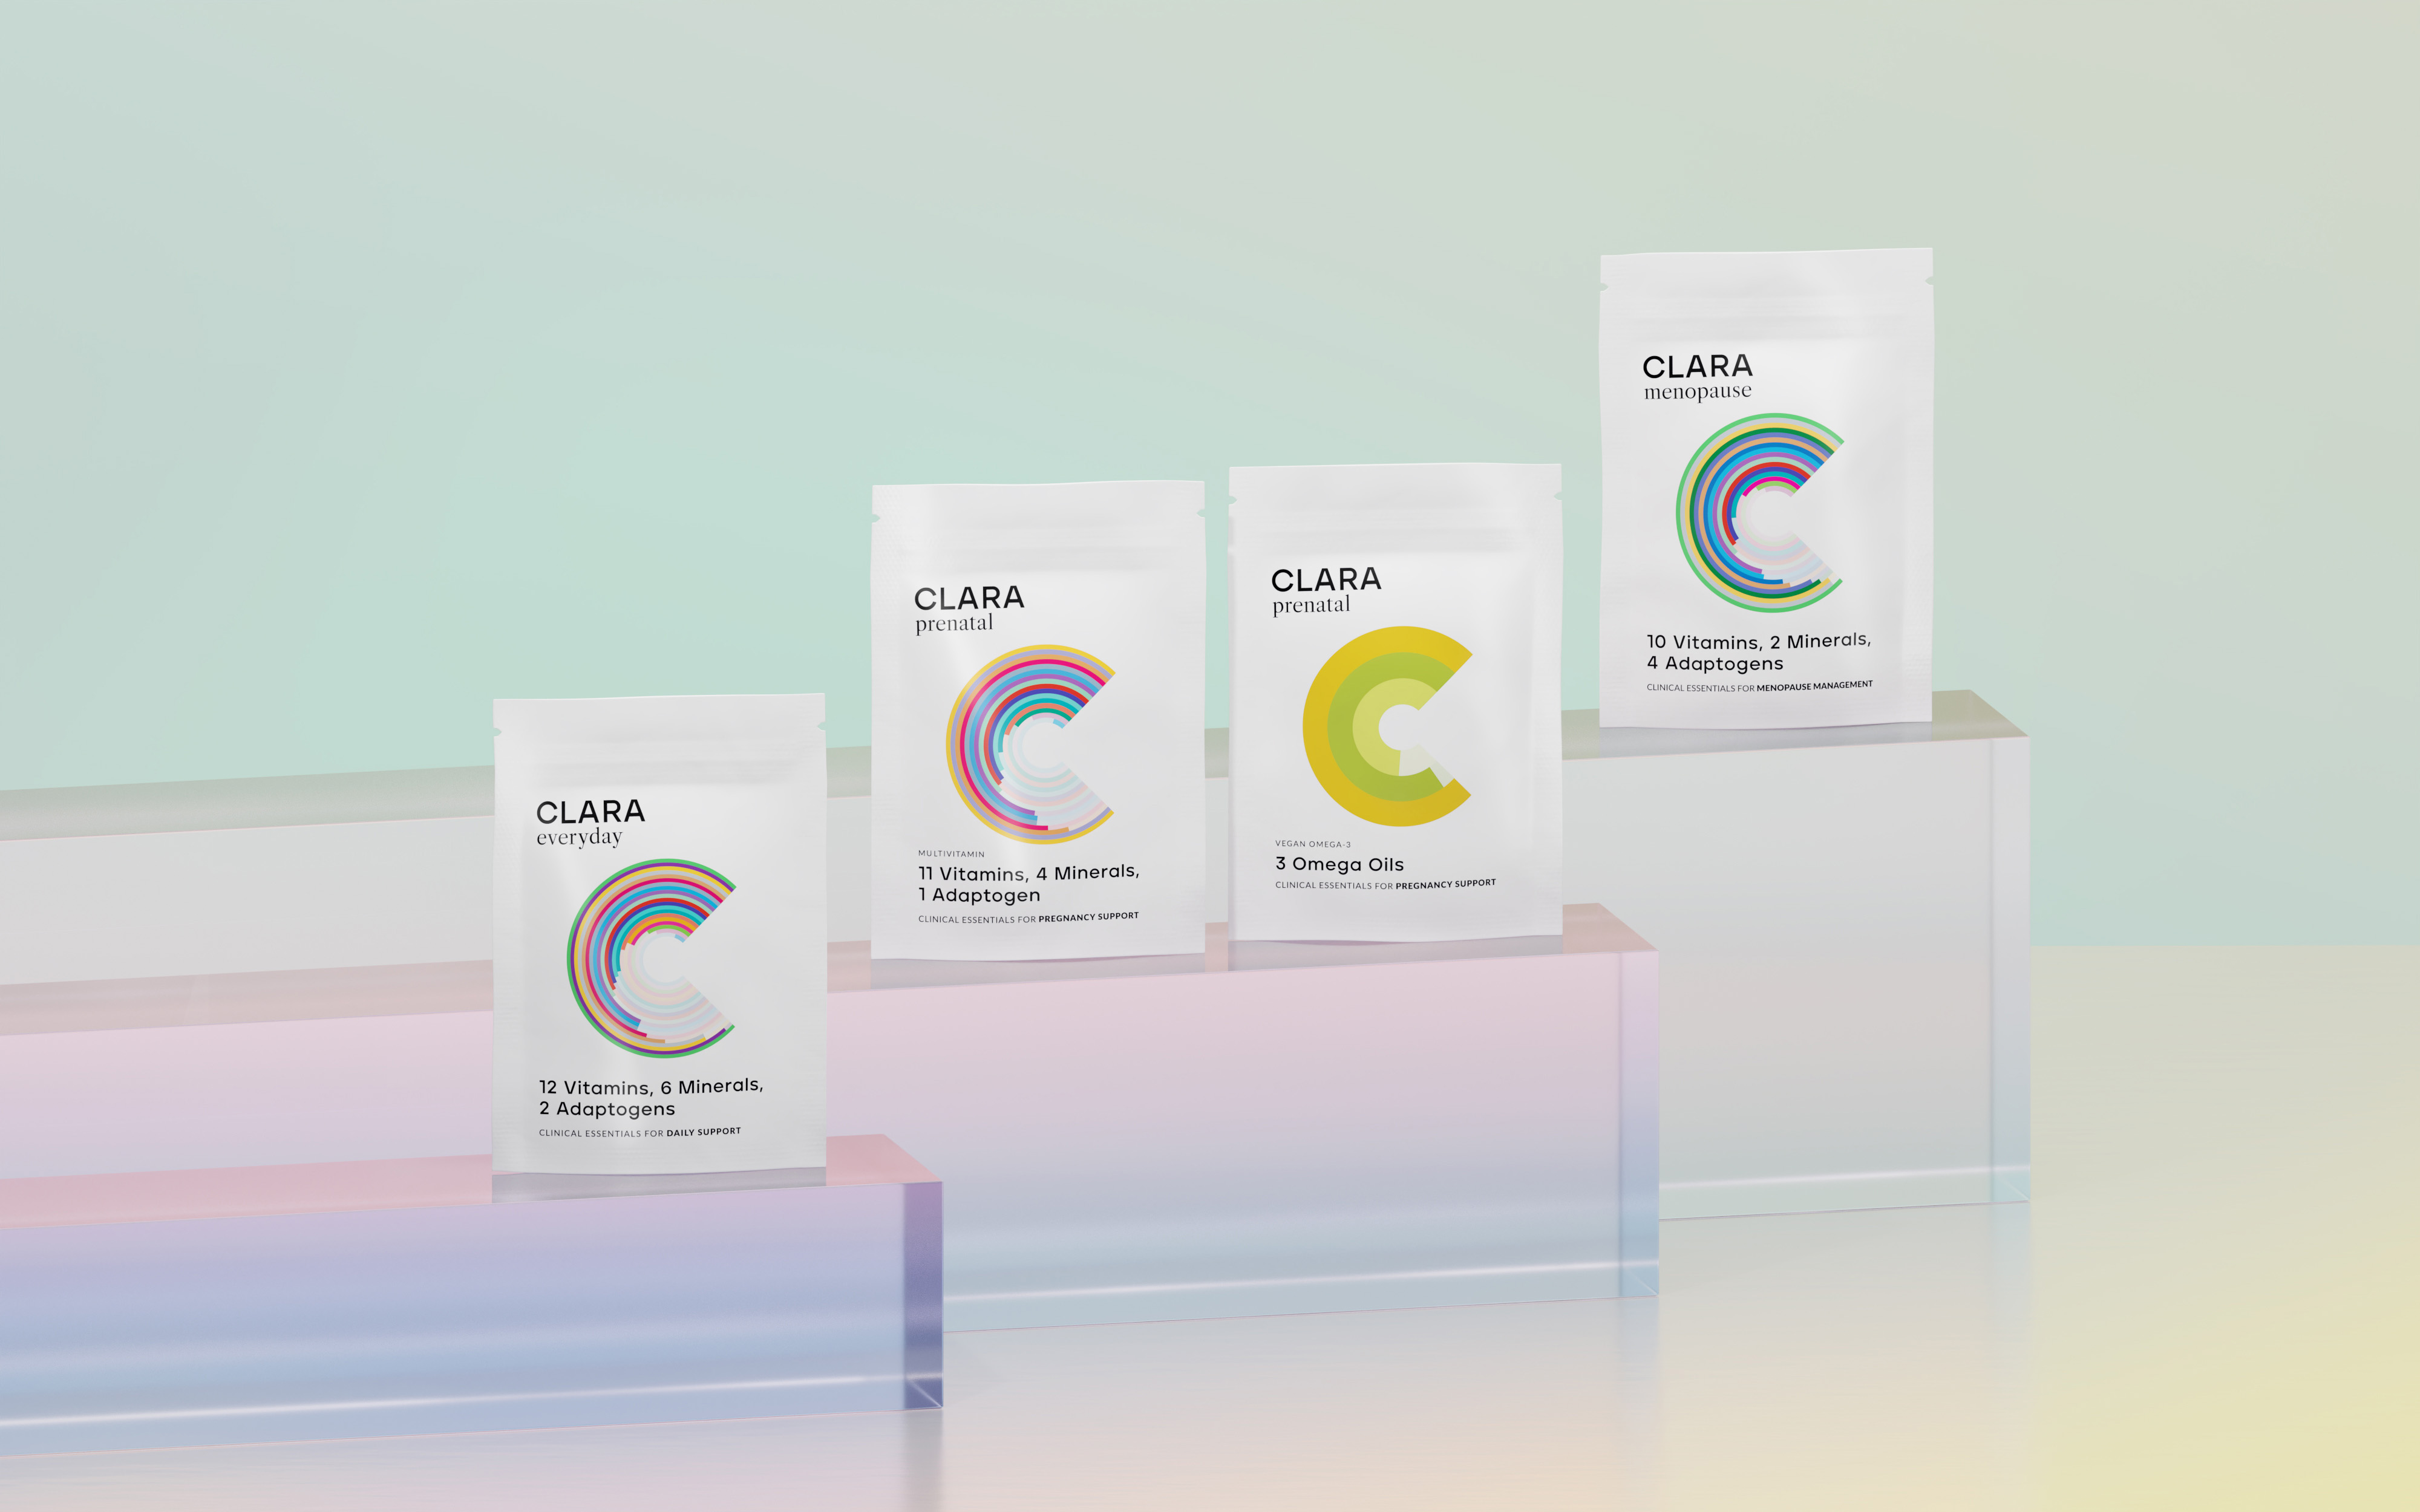 Studio Unbound and Clara Are Working Together to Bring More Clarity to Women’s Health